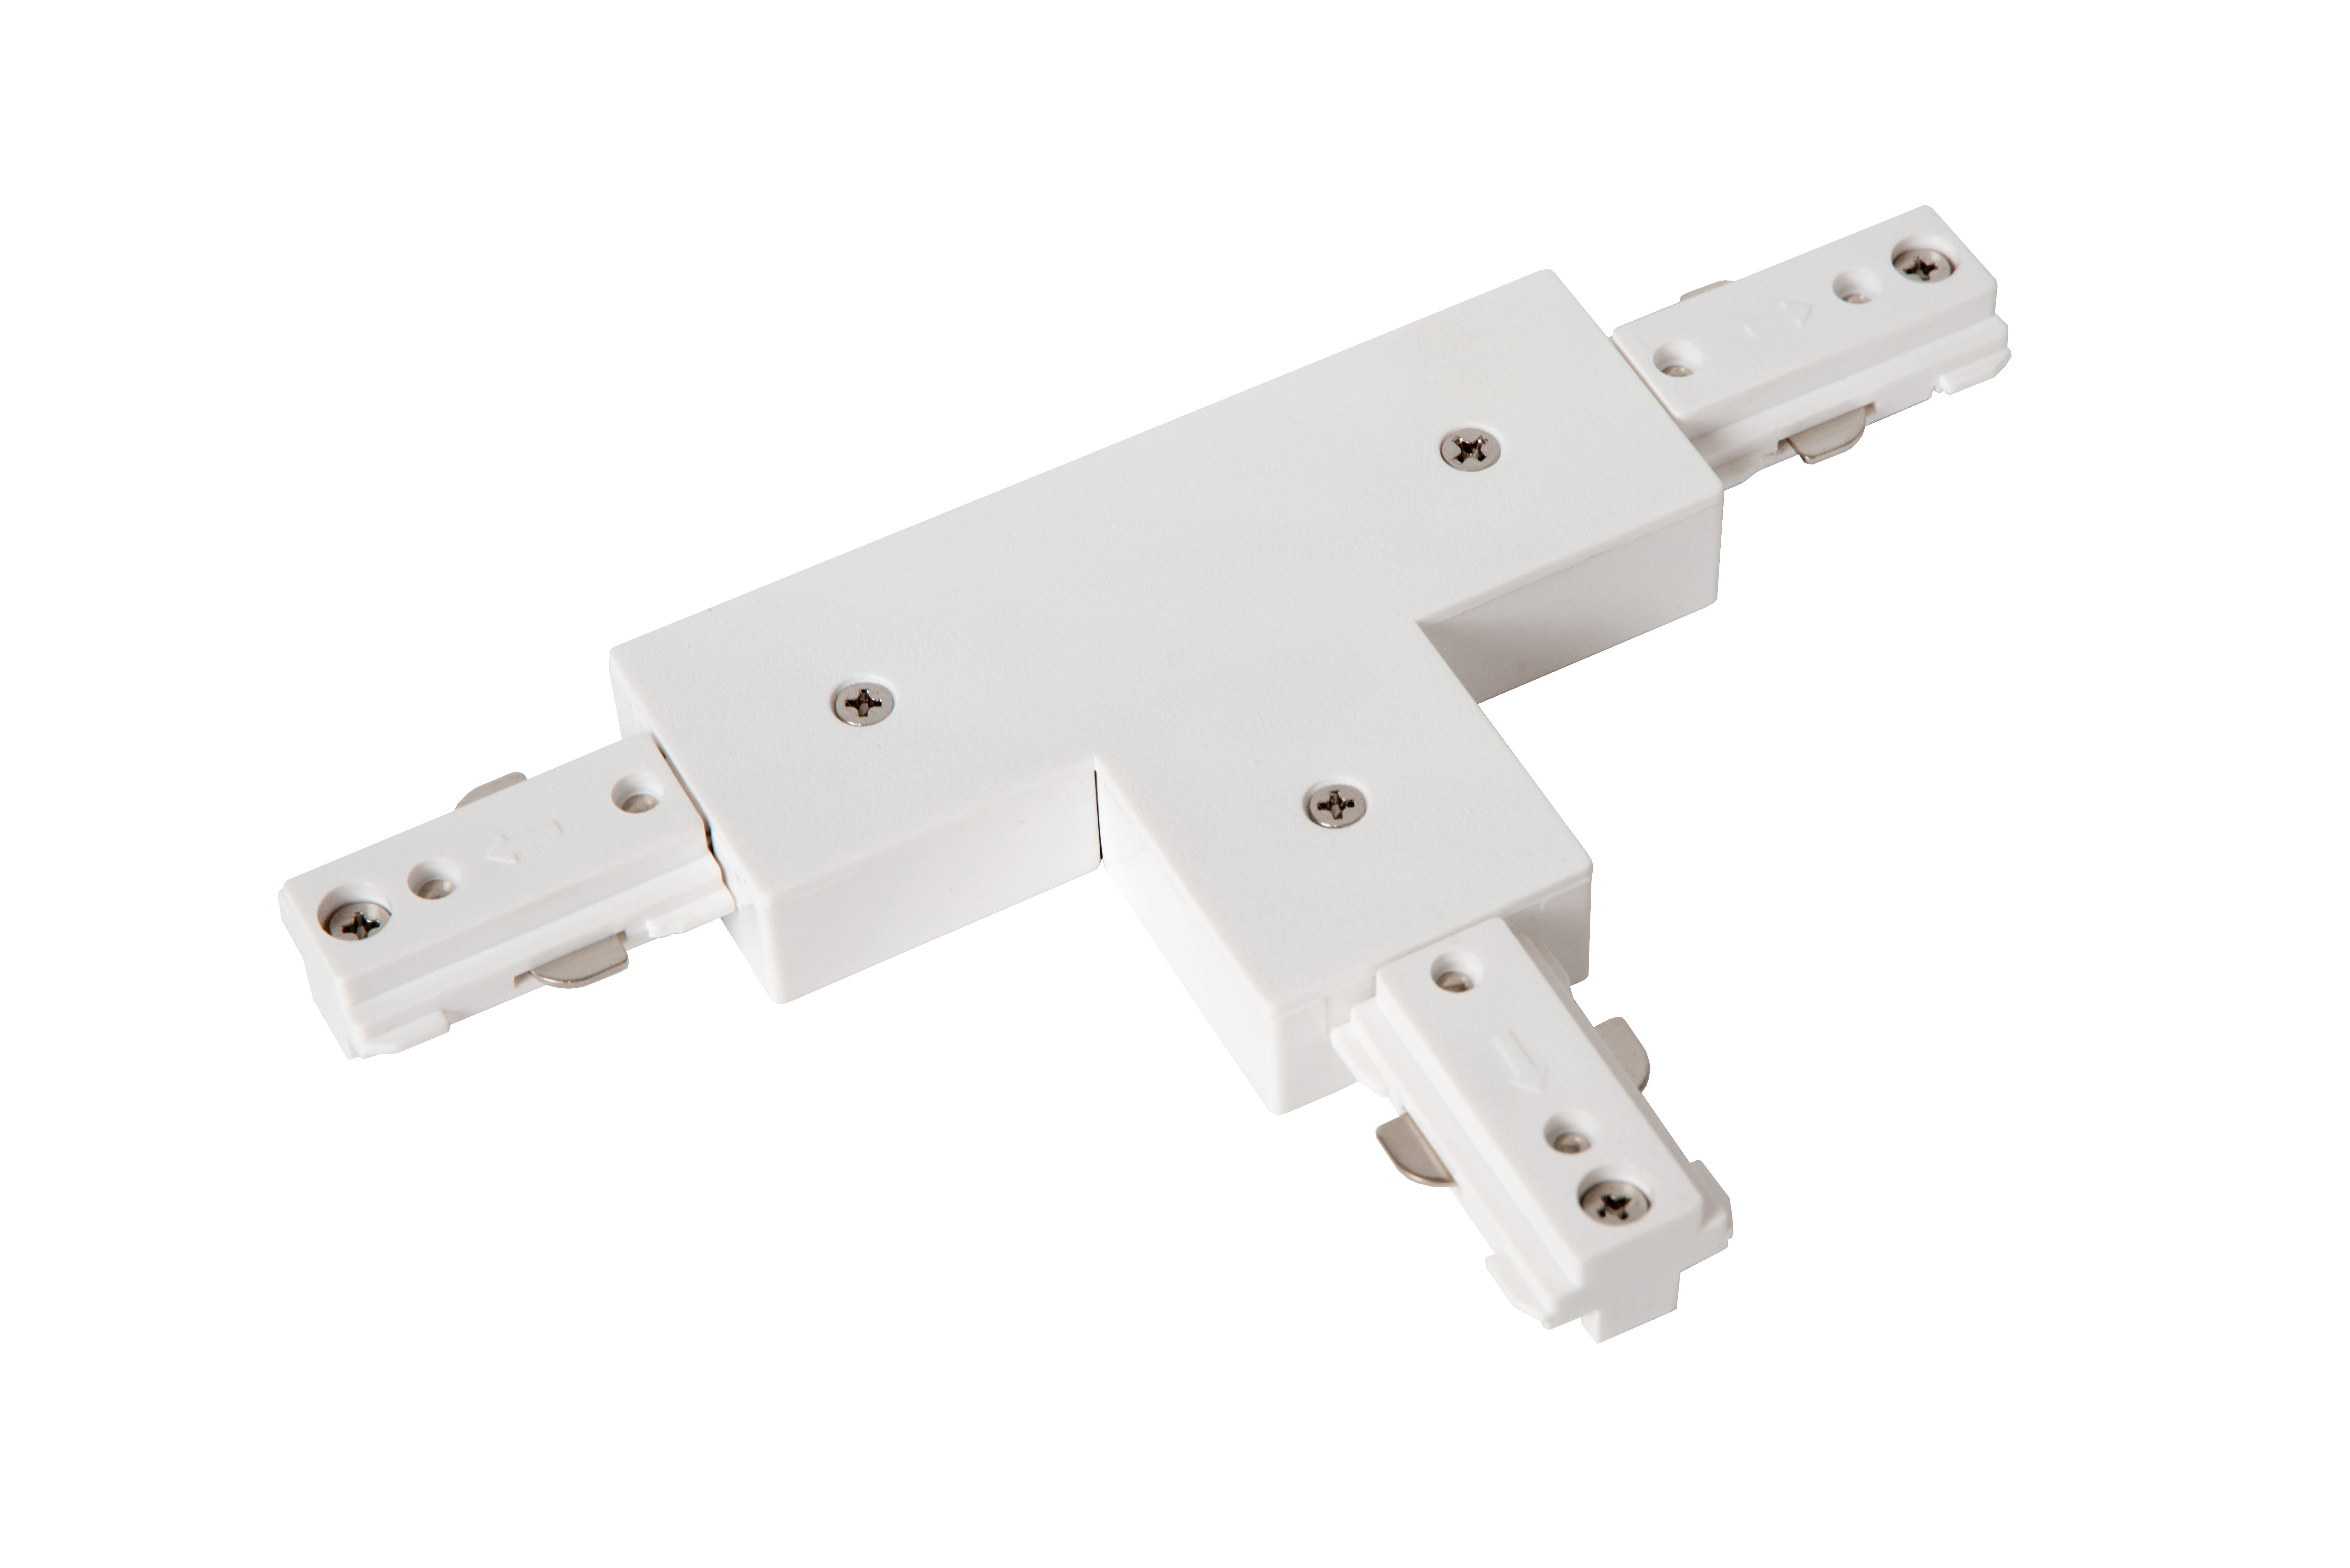 LU 09950/07/31 Lucide TRACK T-connector - 1-circuit Track lighting system - White (Extension)